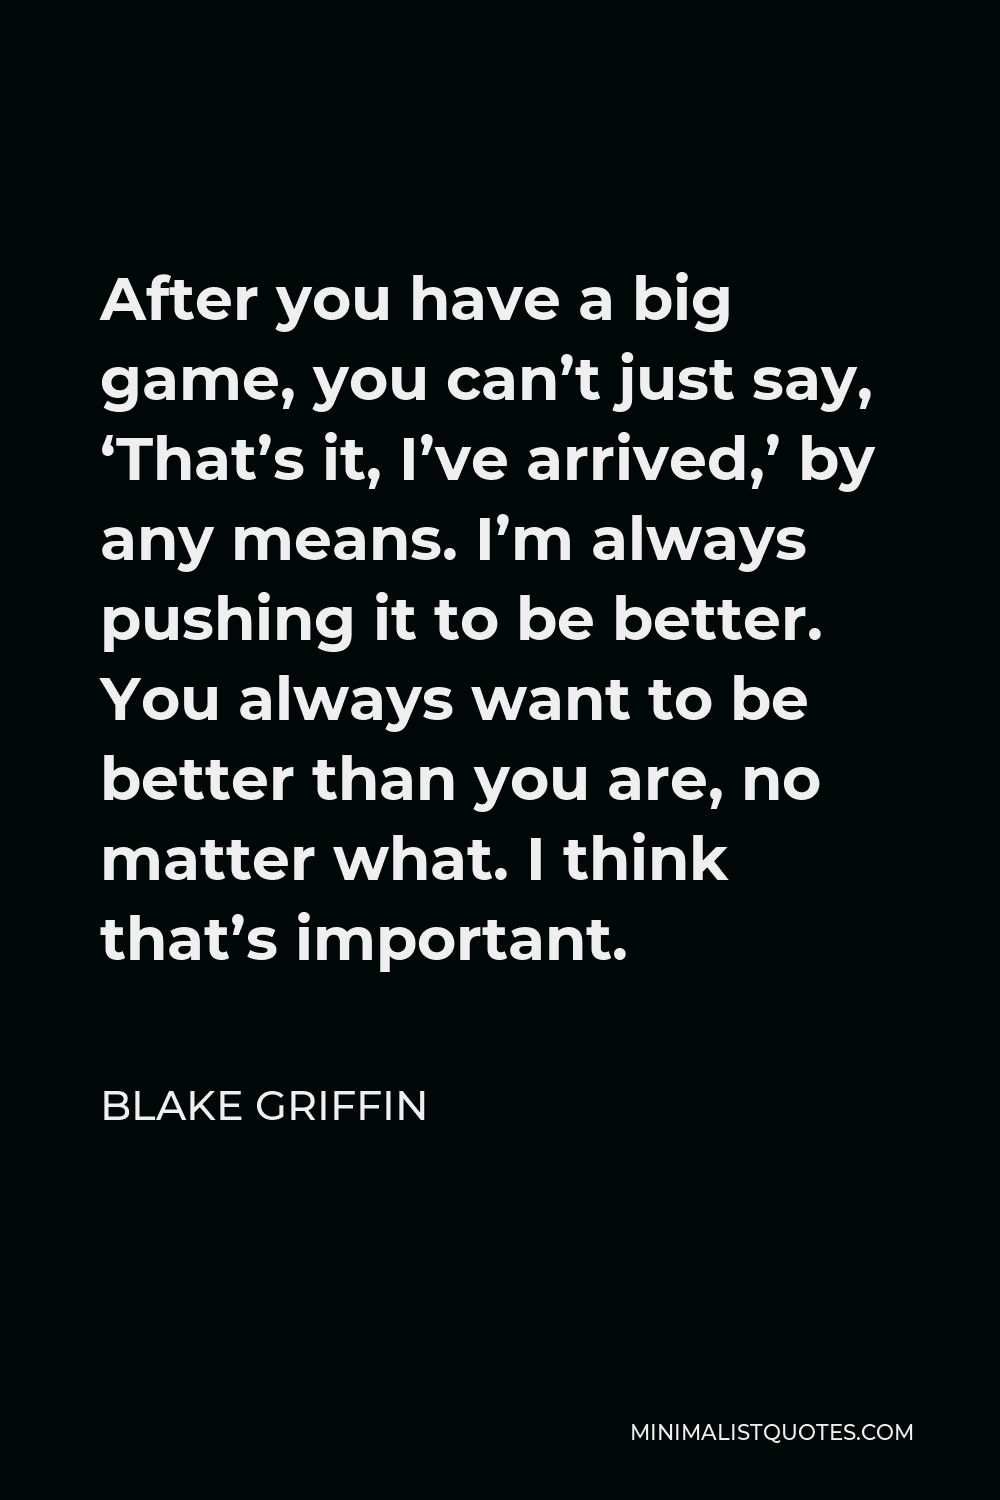 Blake Griffin Quote - After you have a big game, you can’t just say, ‘That’s it, I’ve arrived,’ by any means. I’m always pushing it to be better. You always want to be better than you are, no matter what. I think that’s important.